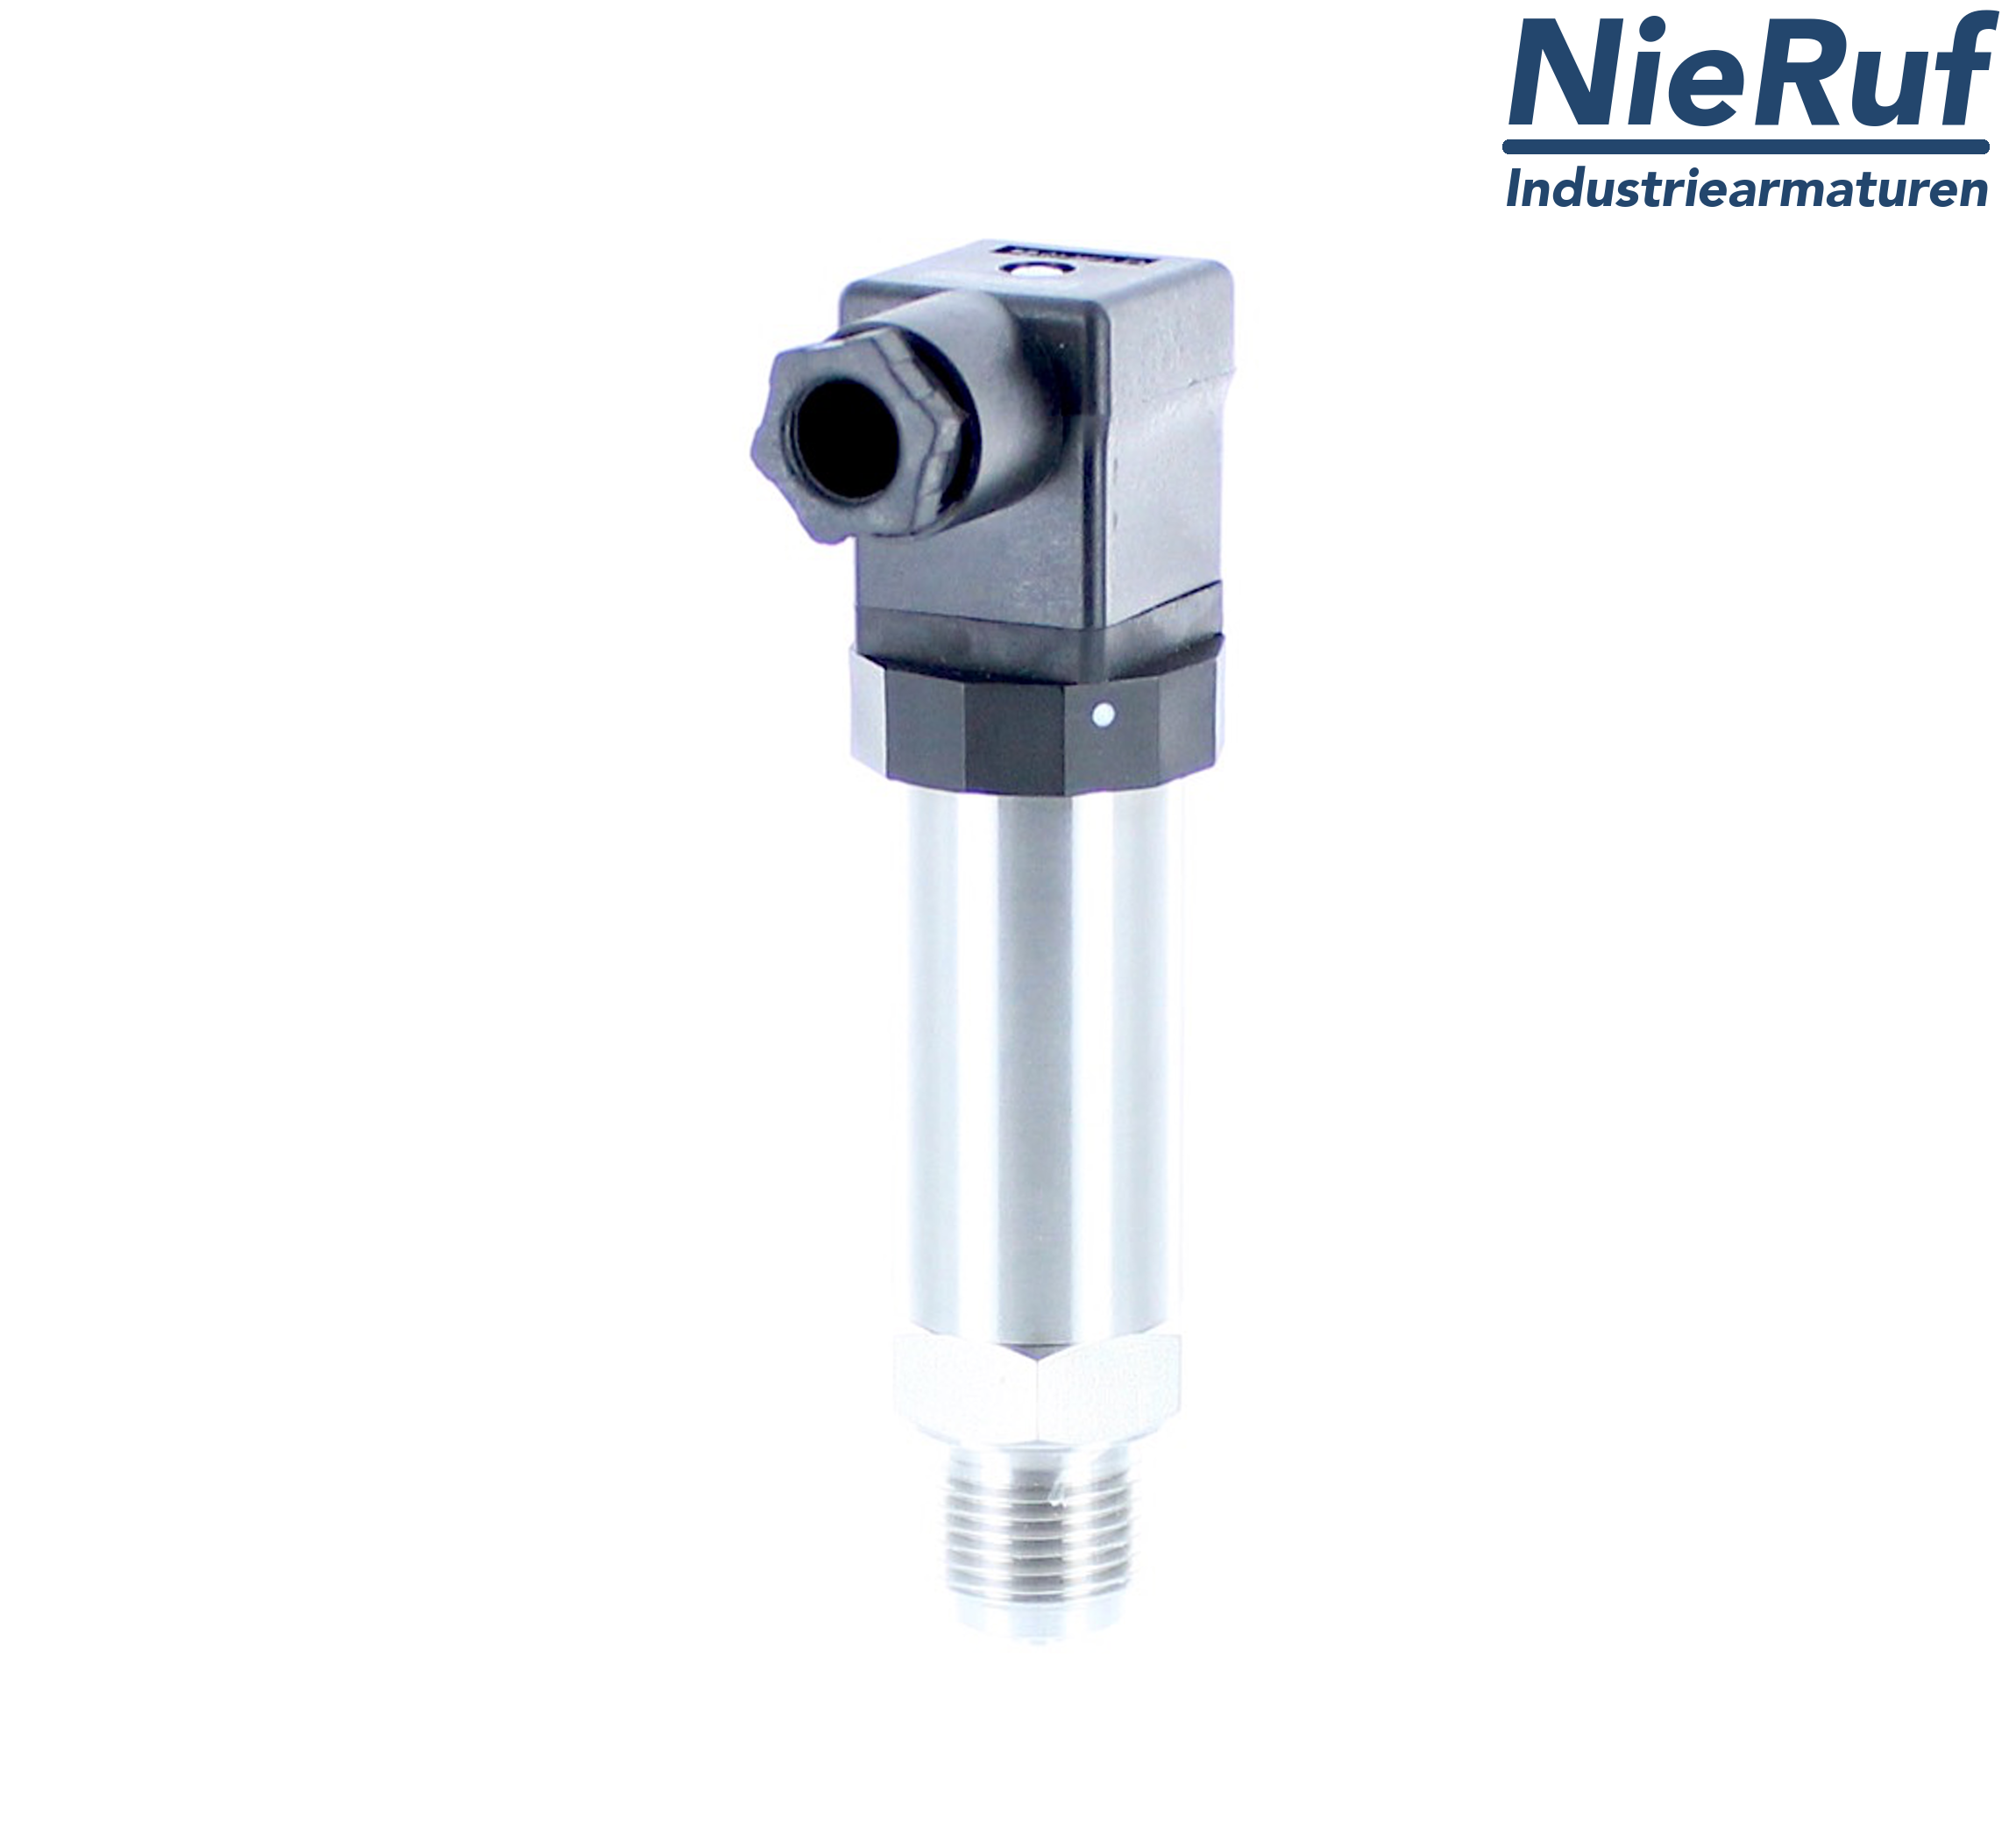 pressure sensor G 1/4" B DS01 stainless steel 2-wire: 4-20mA FPM 0,0 - 400,0 bar